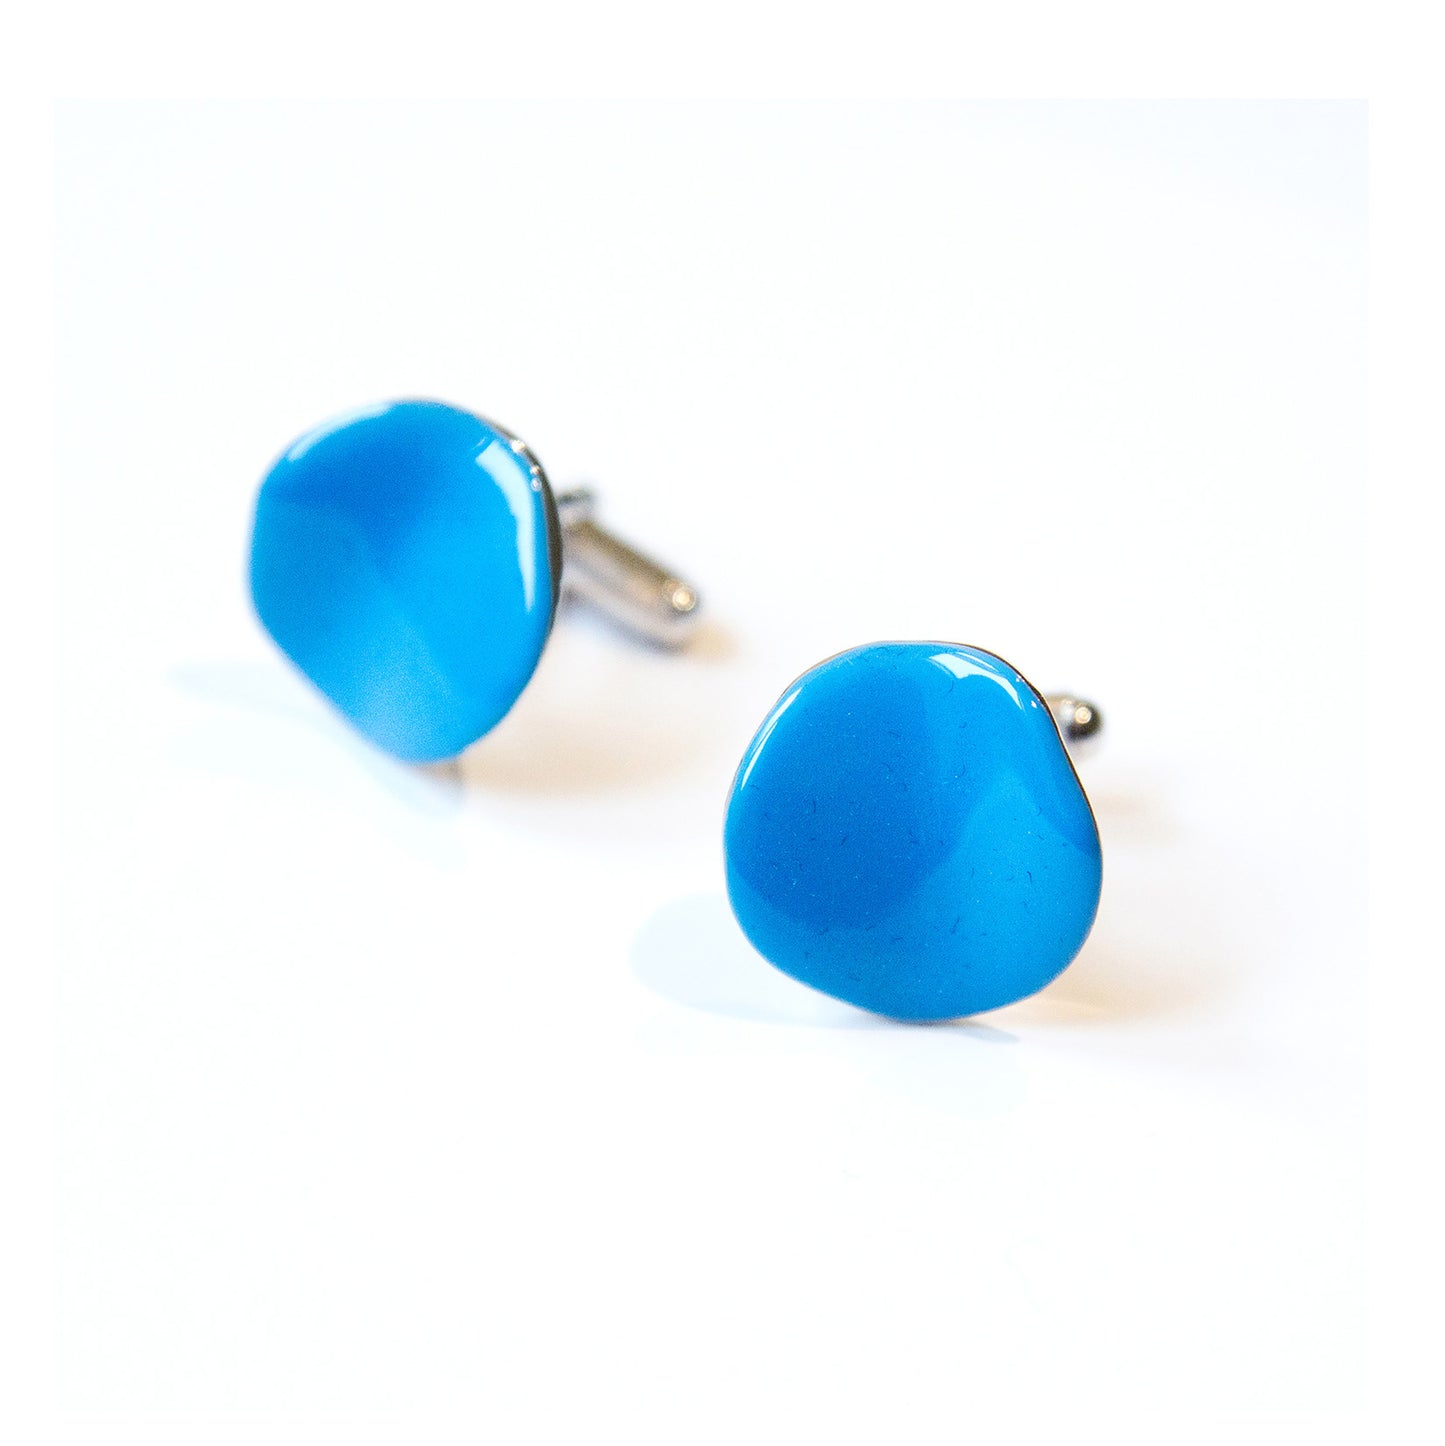 Round disc cufflinks in silver and light blue enamel